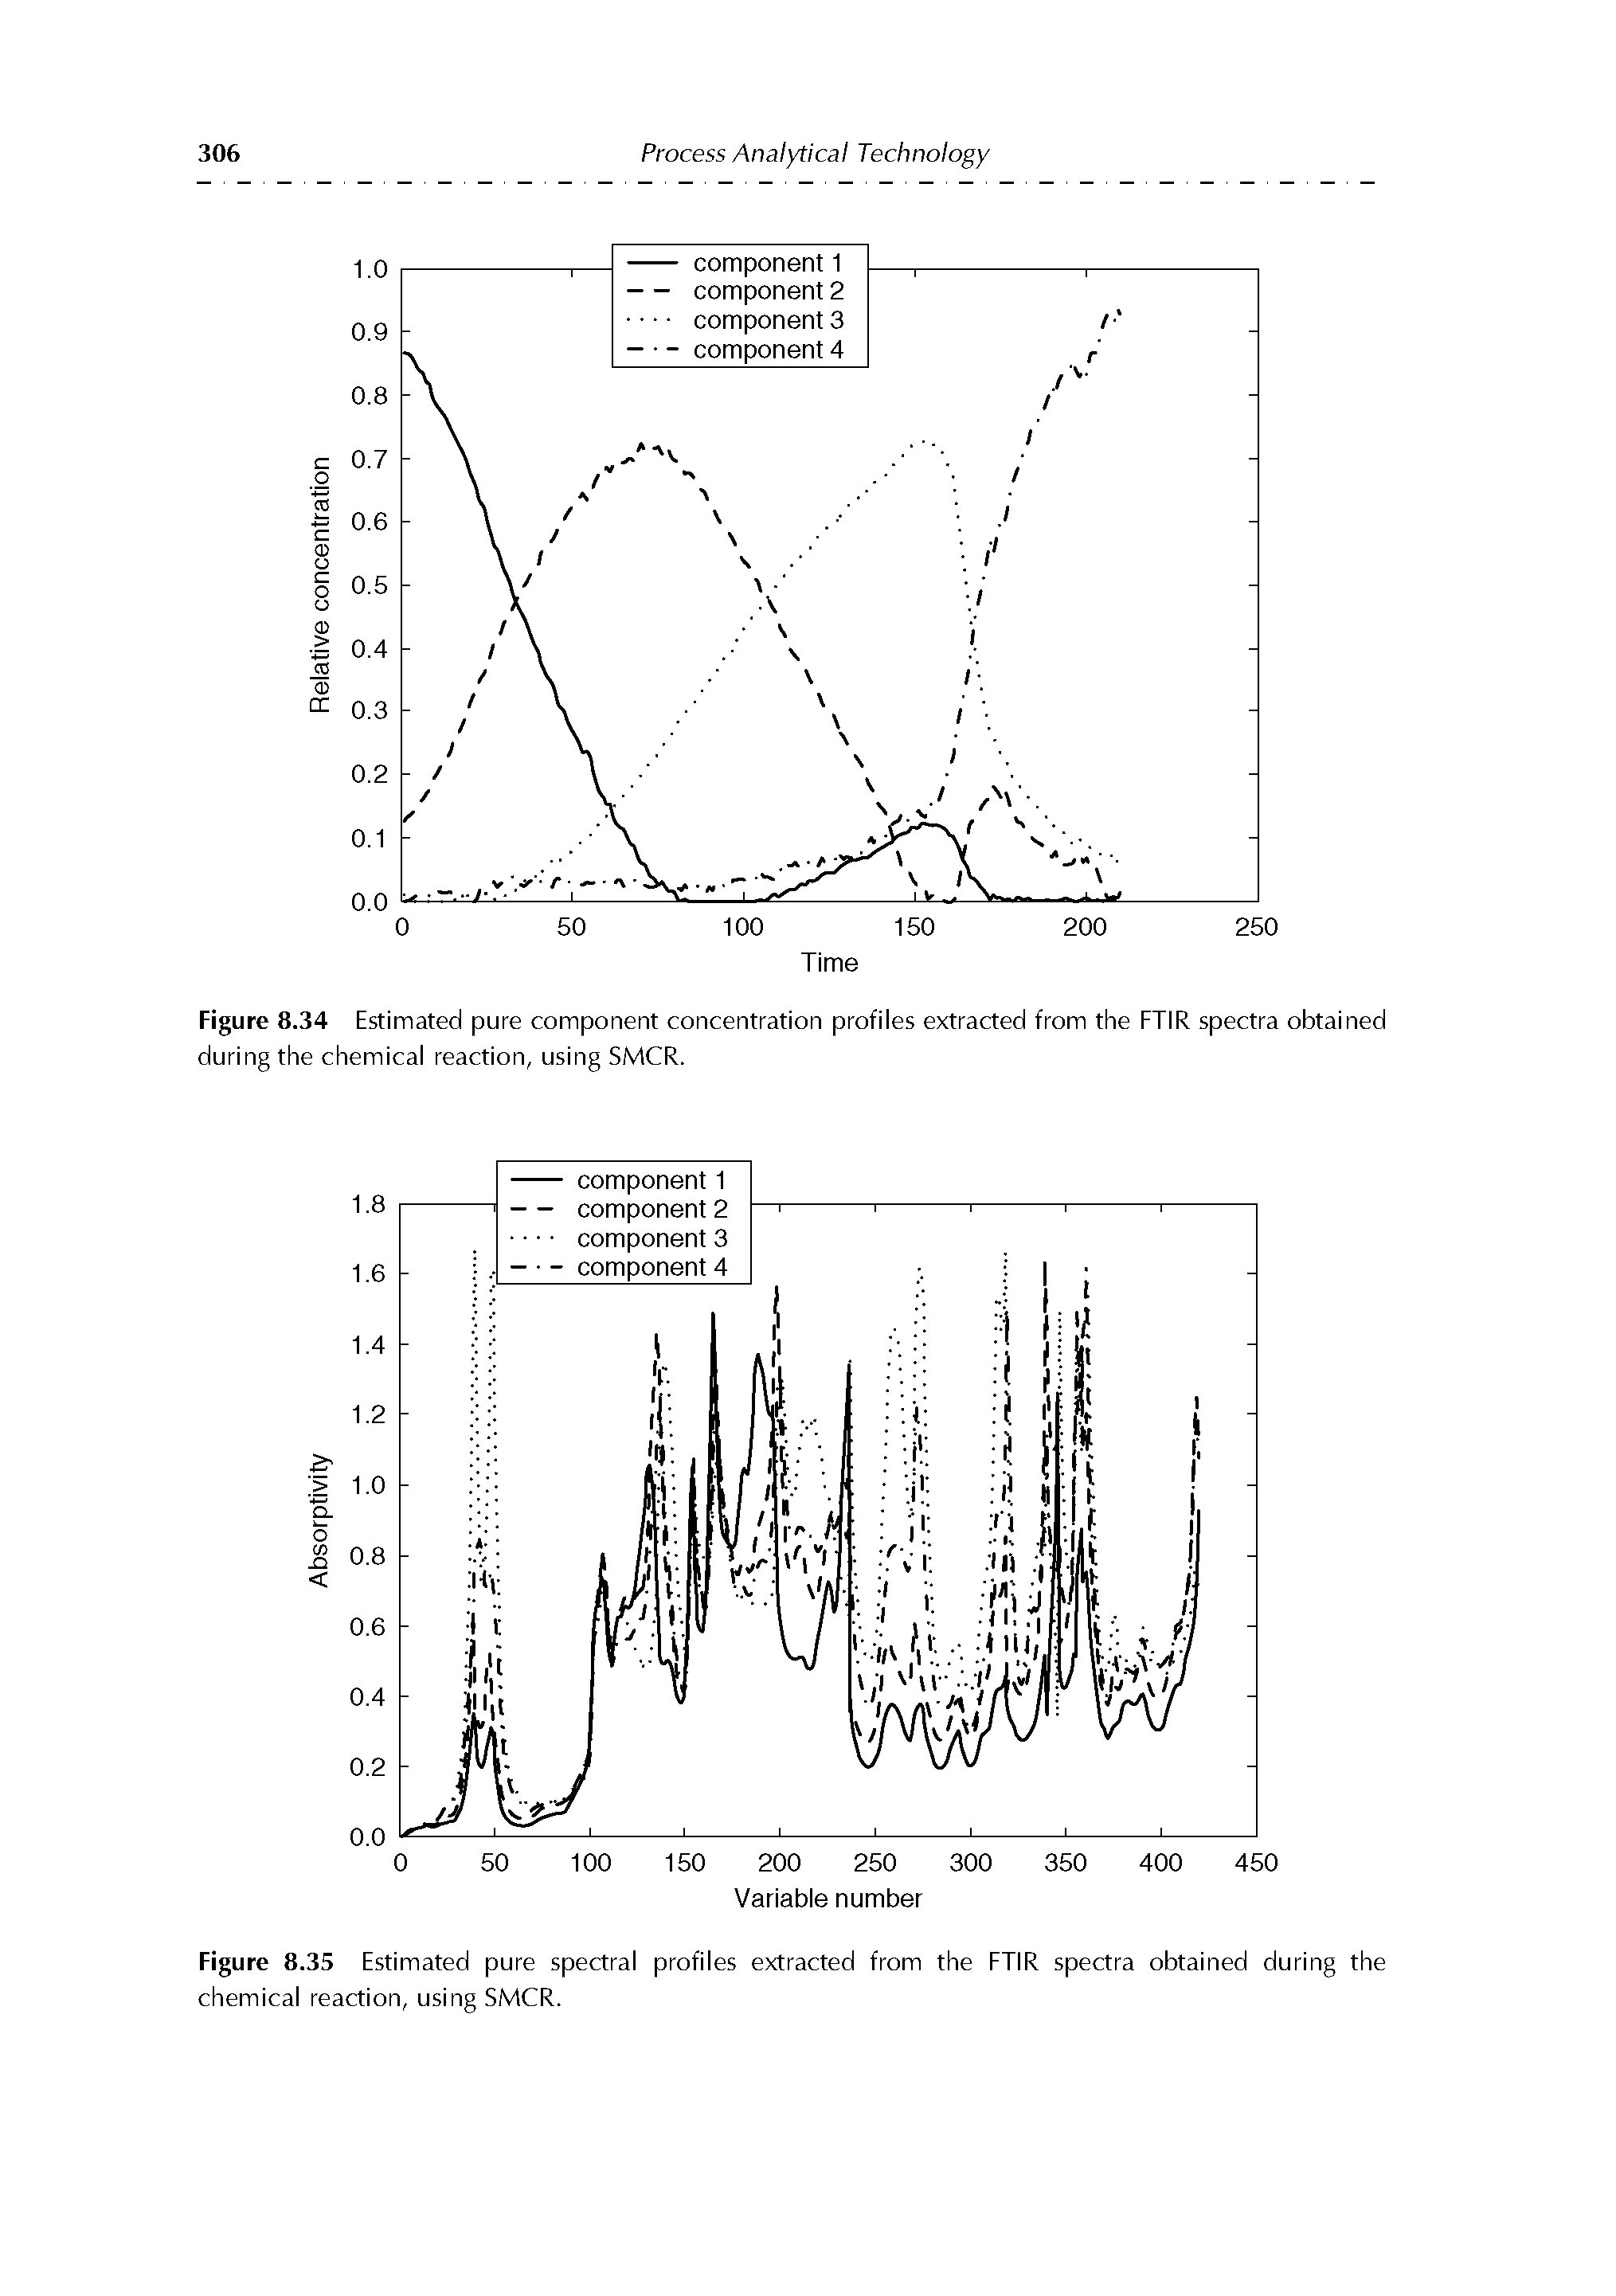 Figure 8.35 Estimated pure spectral profiles extracted from the FTIR spectra obtained during the chemical reaction, using SMCR.